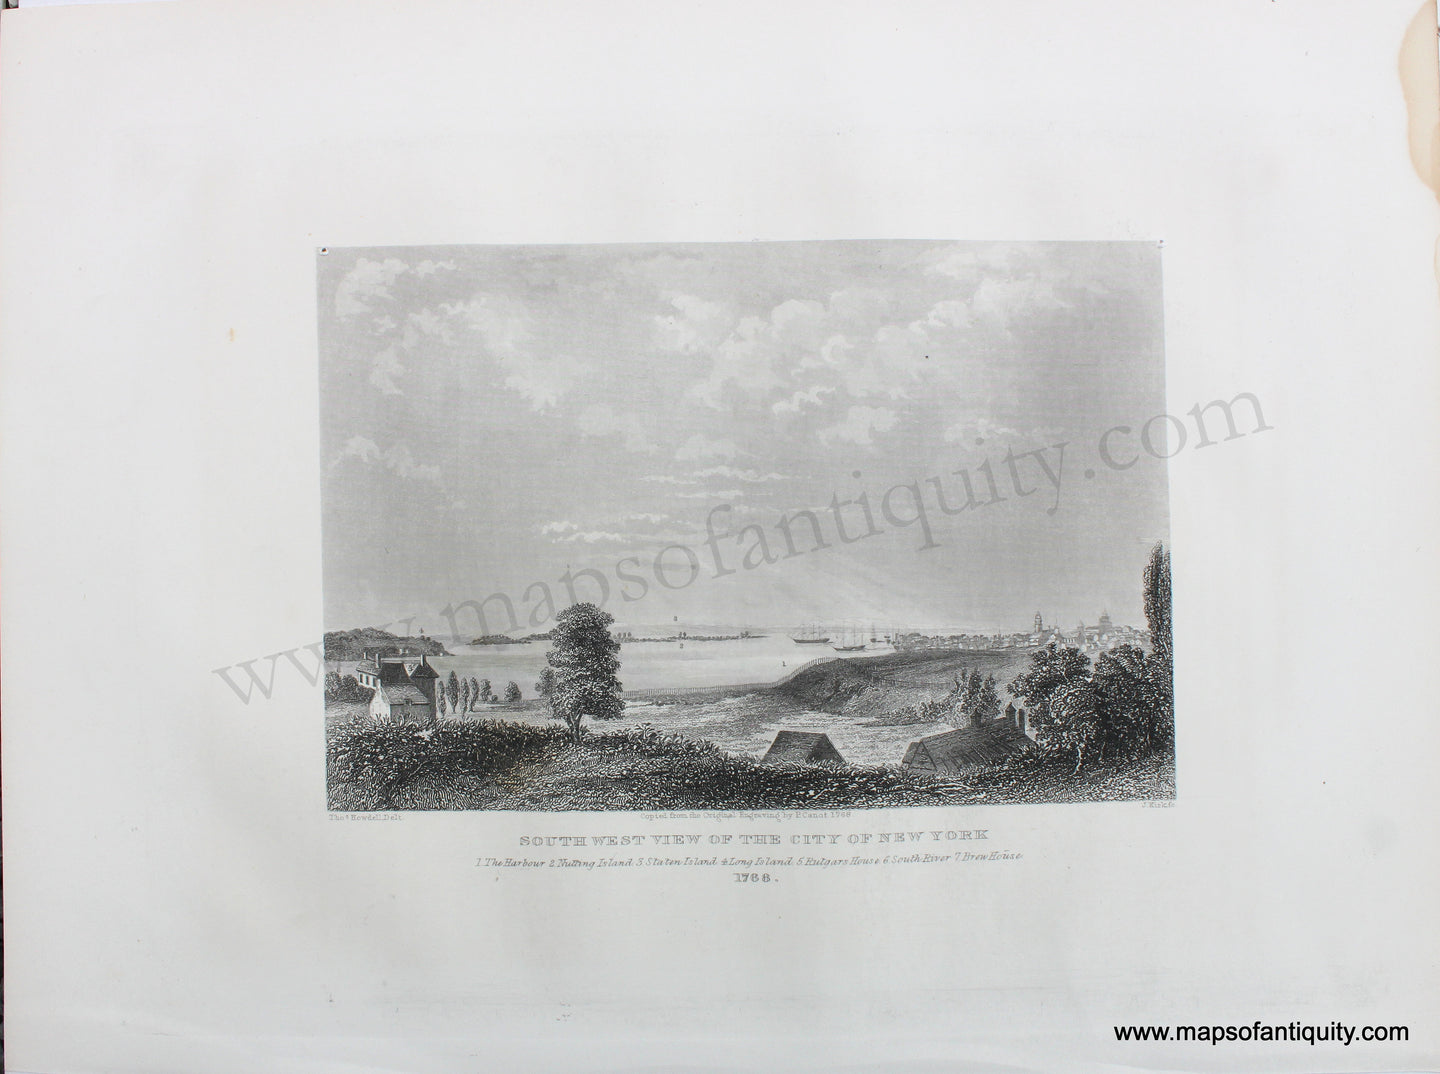 Genuine-Antique-Print-South-West-View-of-the-City-of-New-York-1850-Documentary-History-of-the-State-of-New-York-Maps-Of-Antiquity